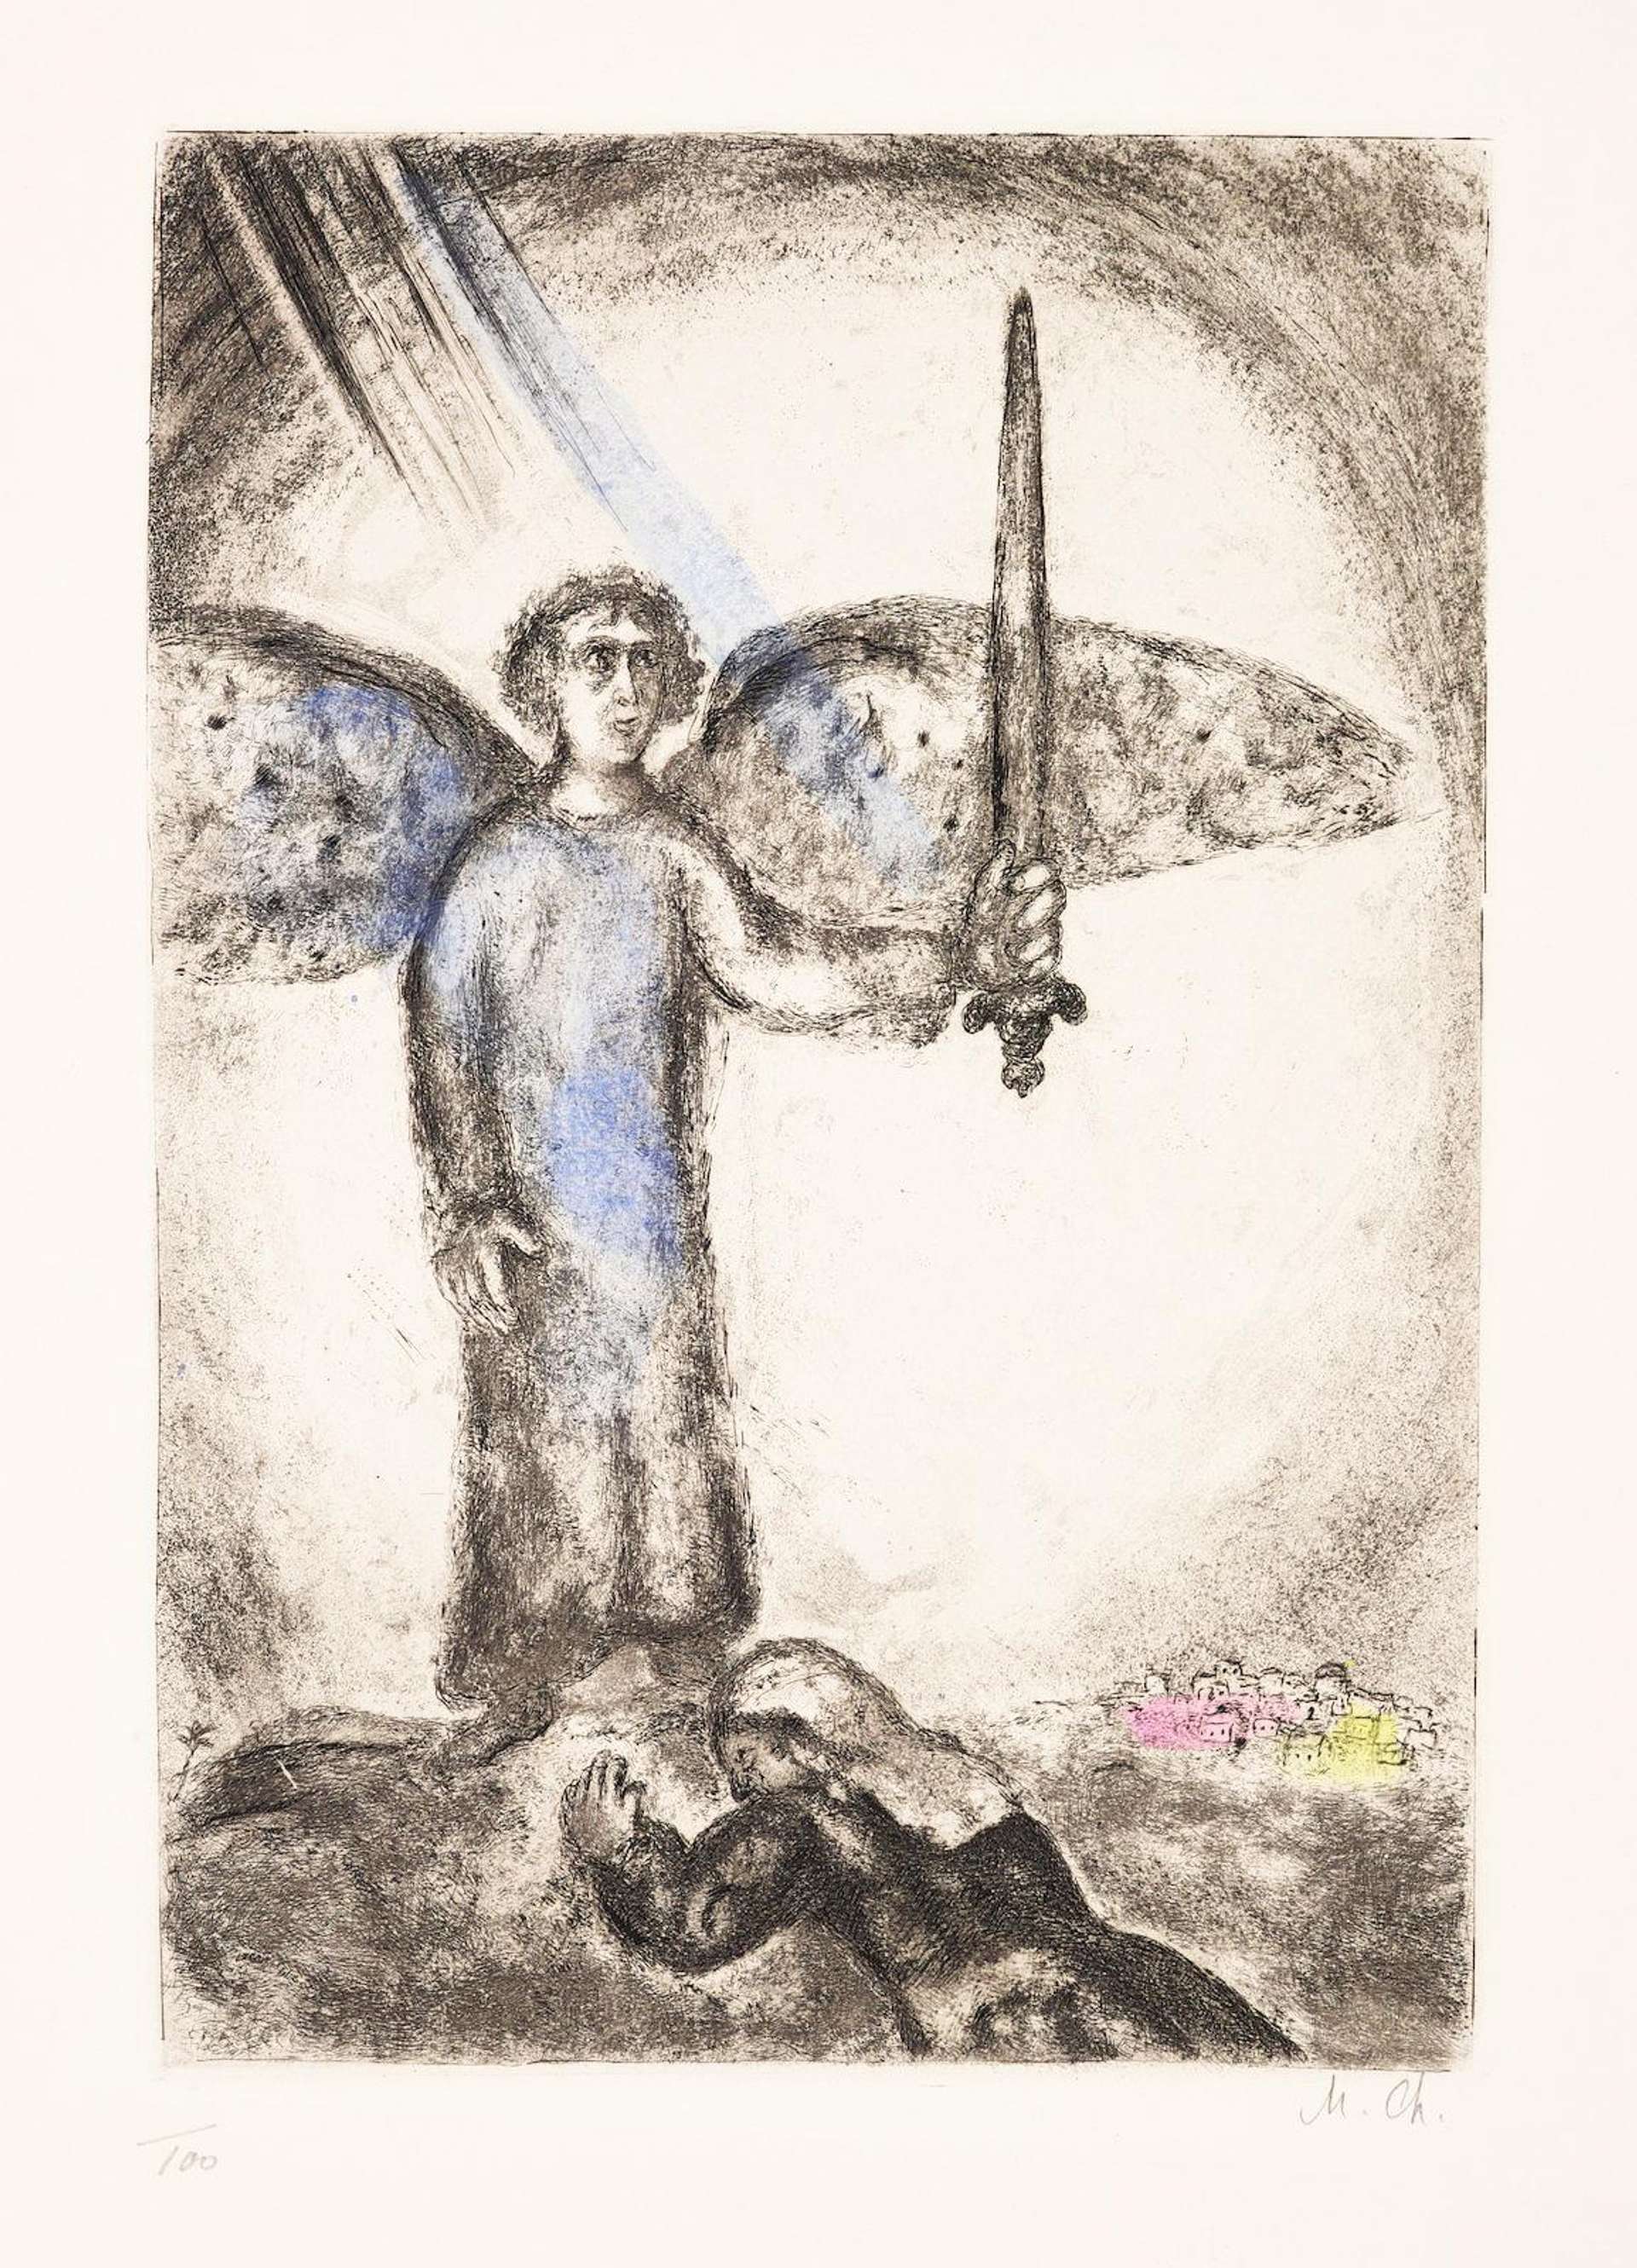 Joshua Before The Armed Angel (La Bible) - Signed Print by Marc Chagall 1931 - MyArtBroker